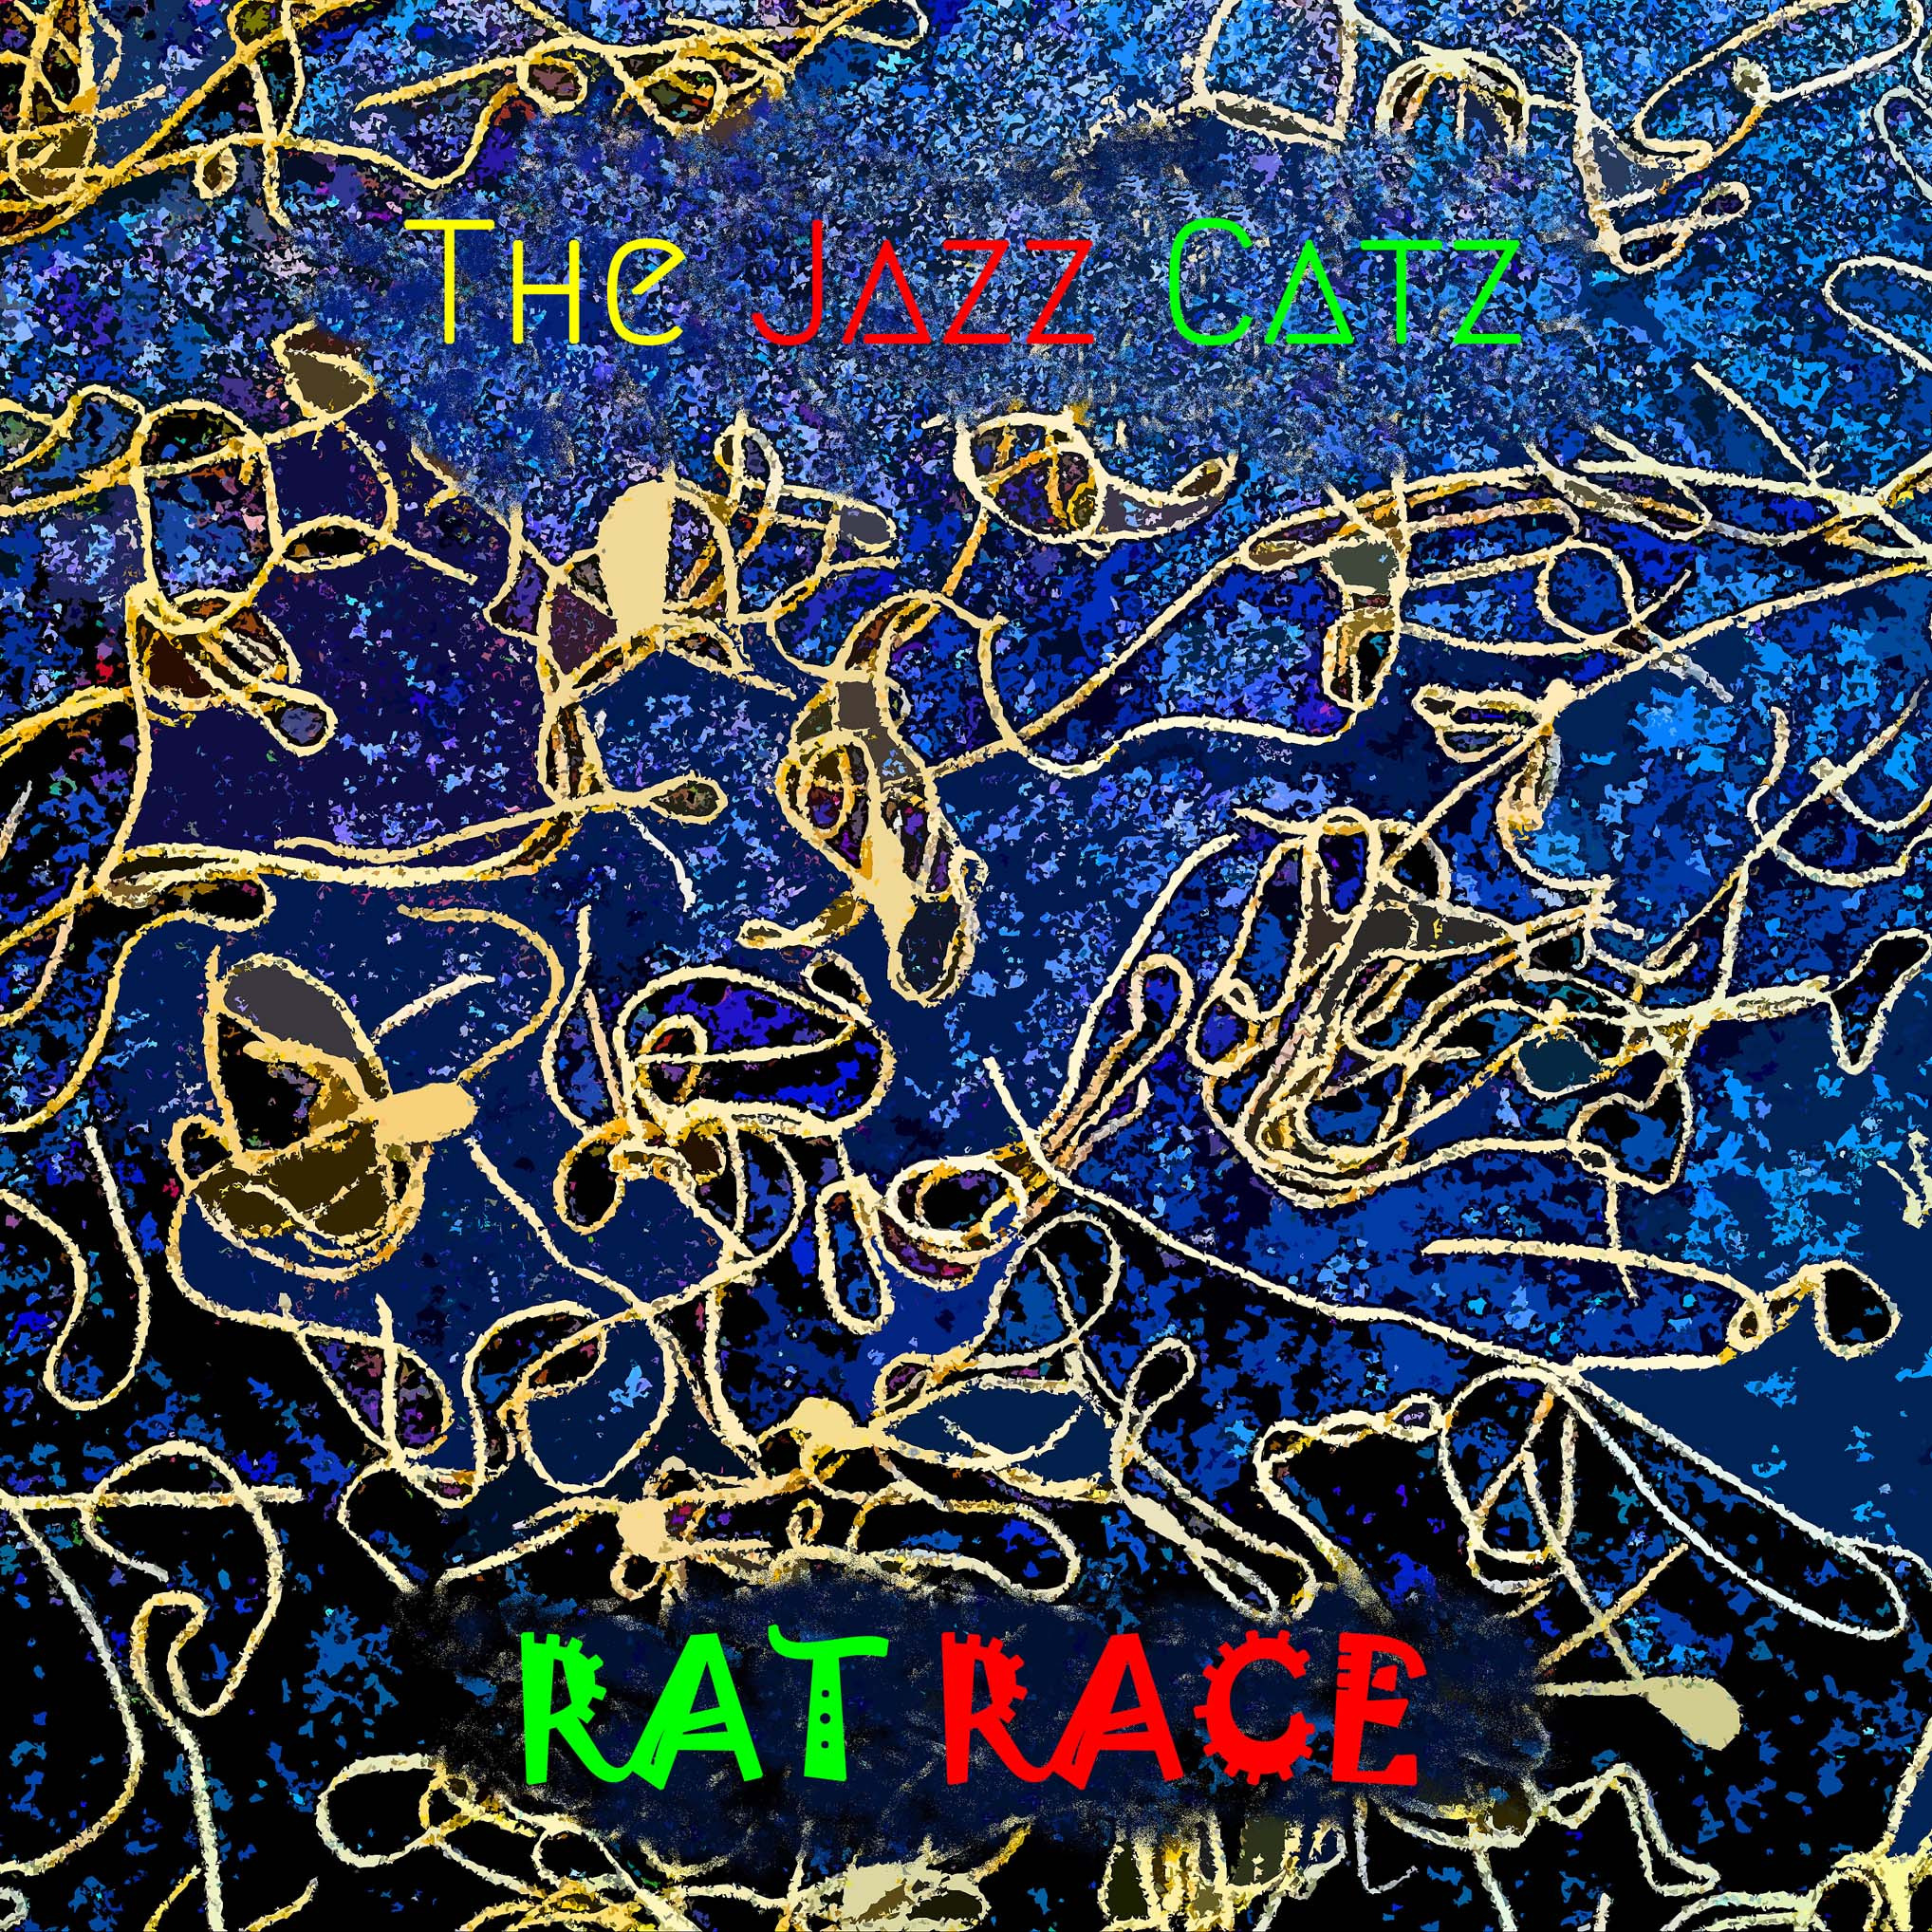 Reinventing The Colorful World Of Jazz Music Through Fresh Groovy Beats - The Jazz Catz Unveils New Single "Rat Race"